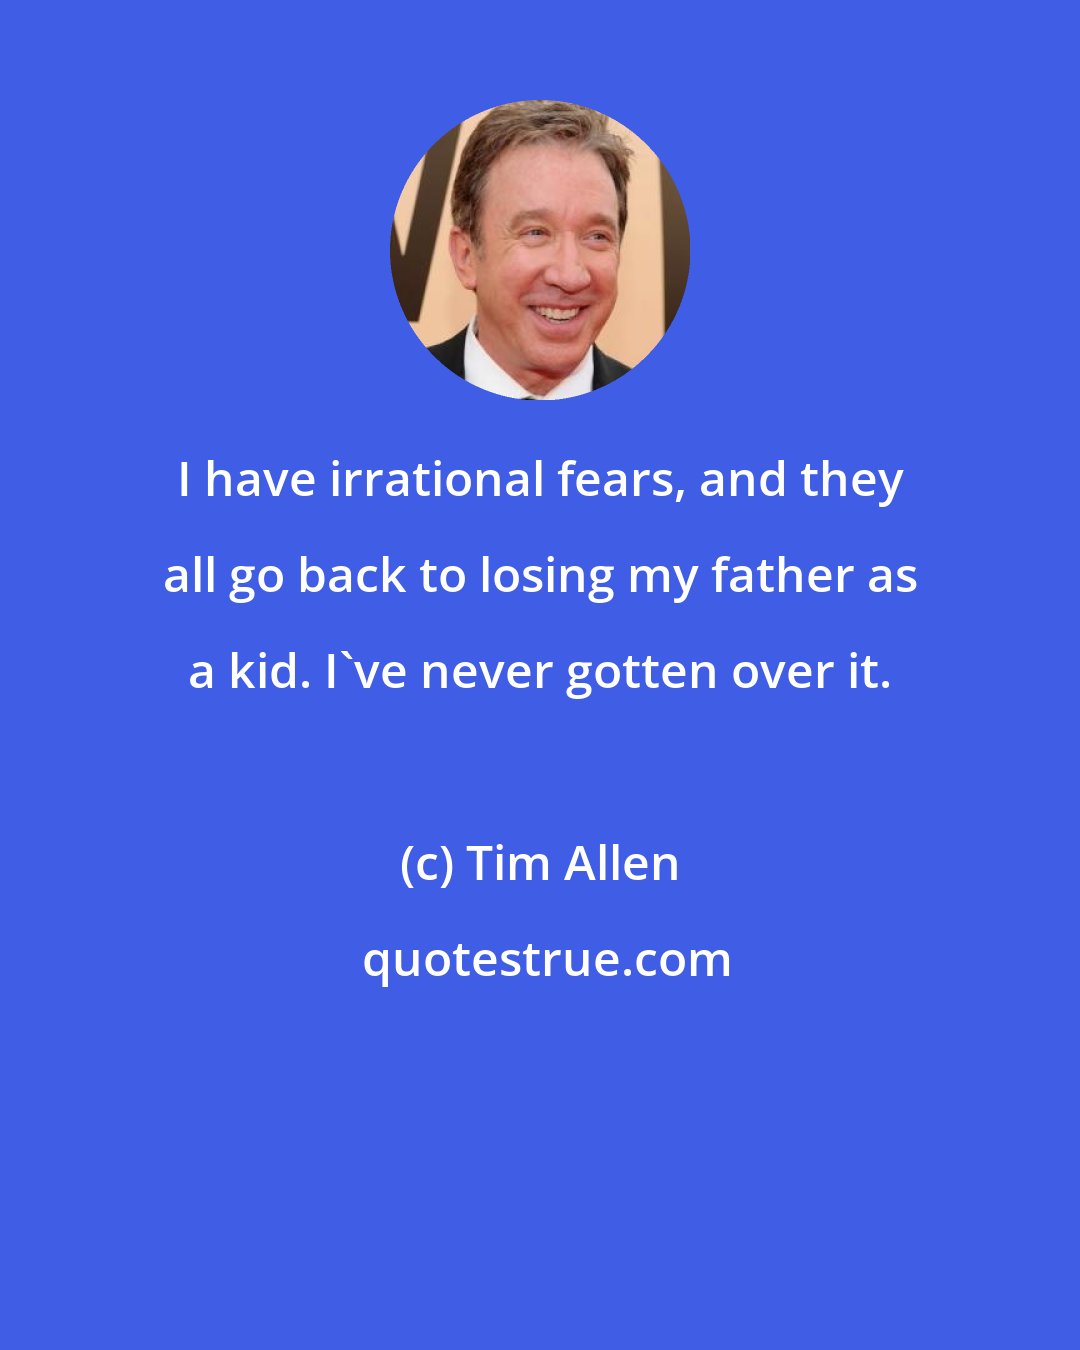 Tim Allen: I have irrational fears, and they all go back to losing my father as a kid. I've never gotten over it.